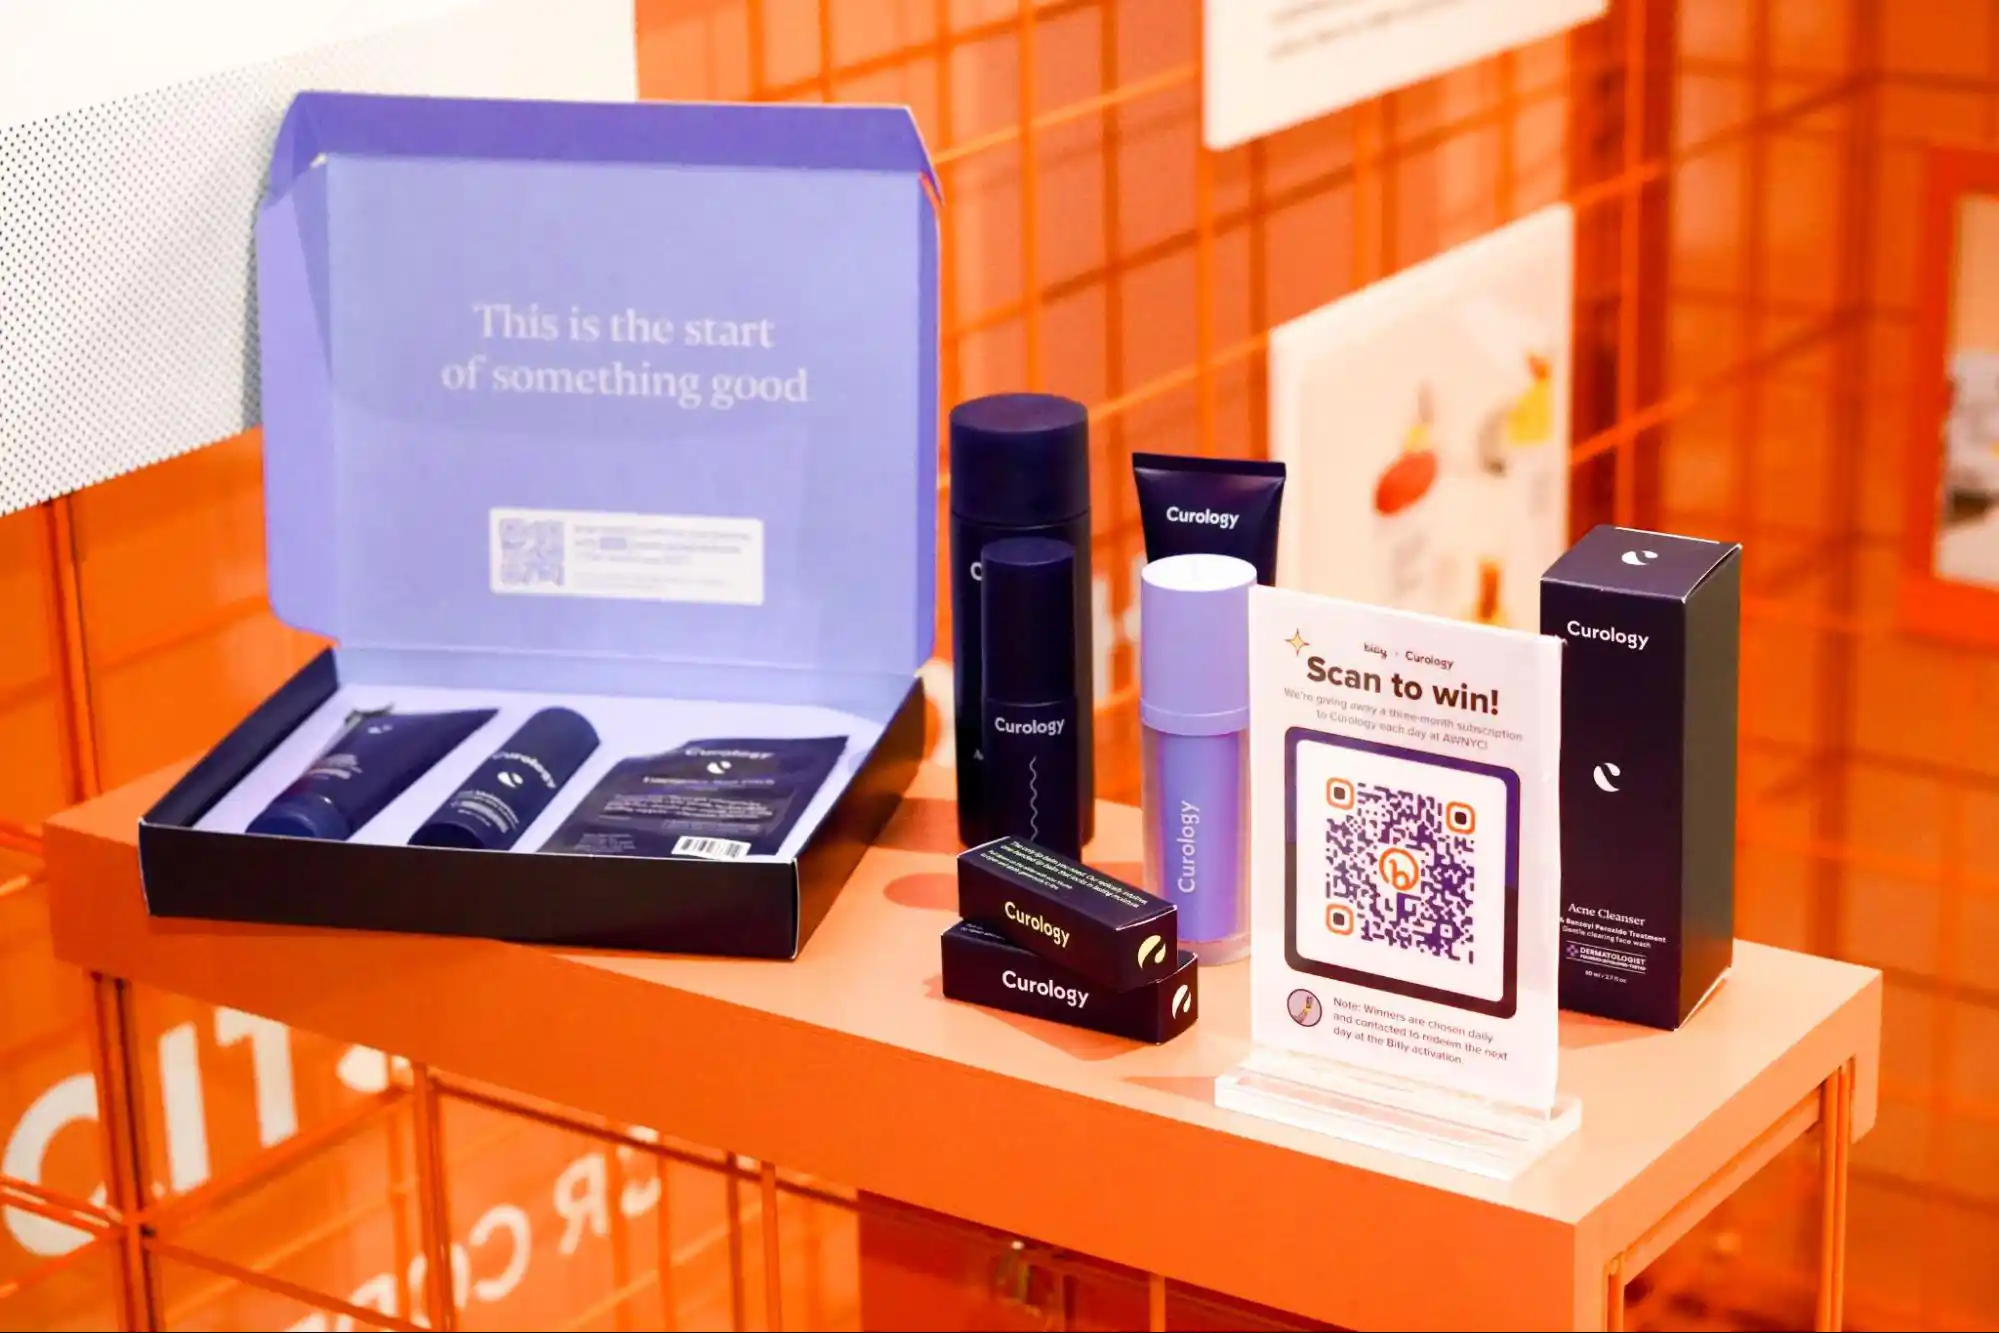 Photo from Bitly's Advertising Week event showcasing Curology products alongside a QR Code.